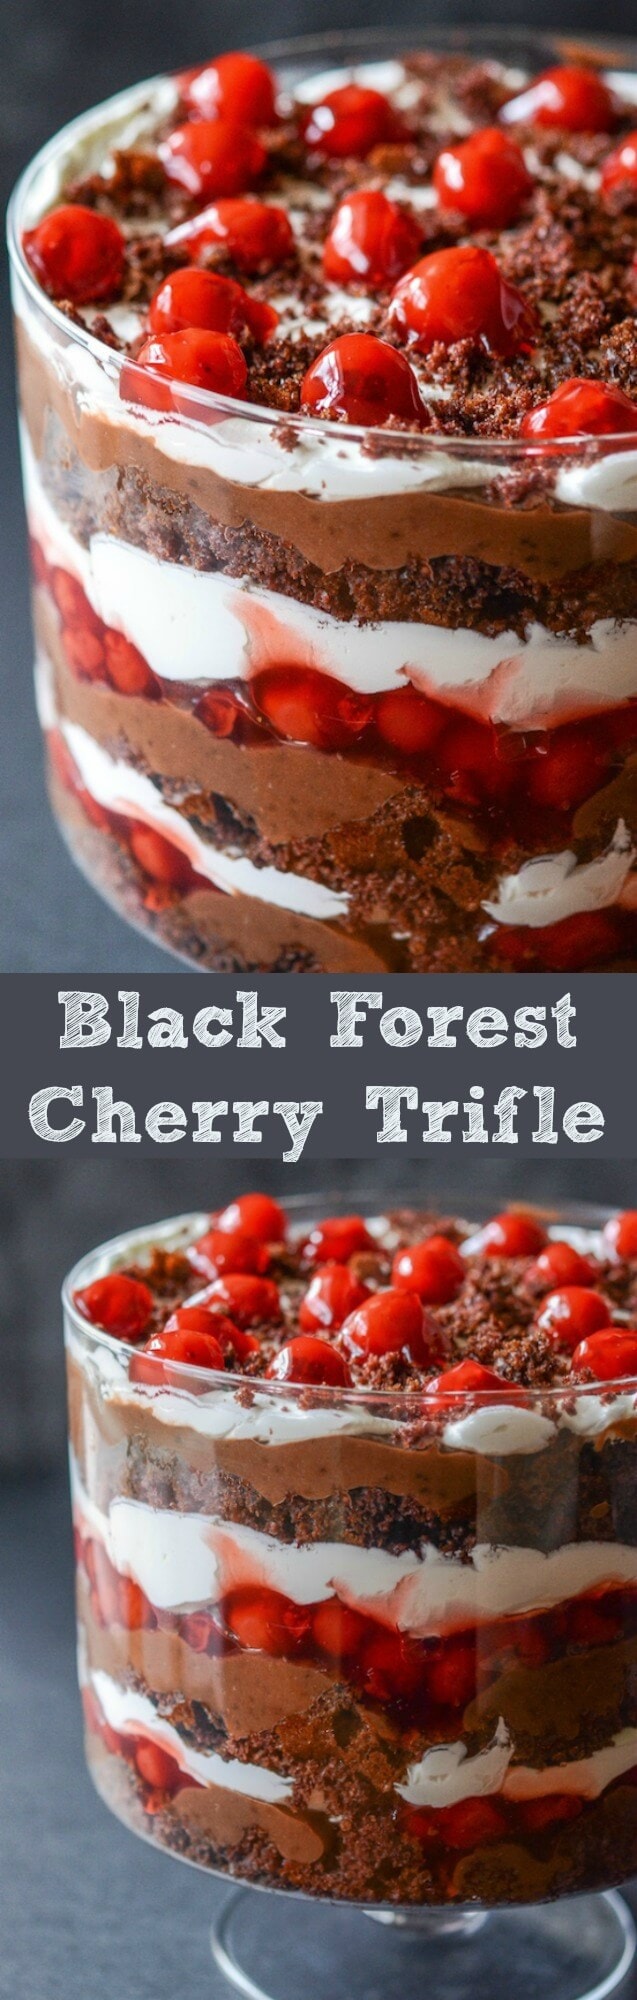 Black Forest Trifle - layers of chocolate cake, chocolate pudding, whipped cream and cherry filling! 